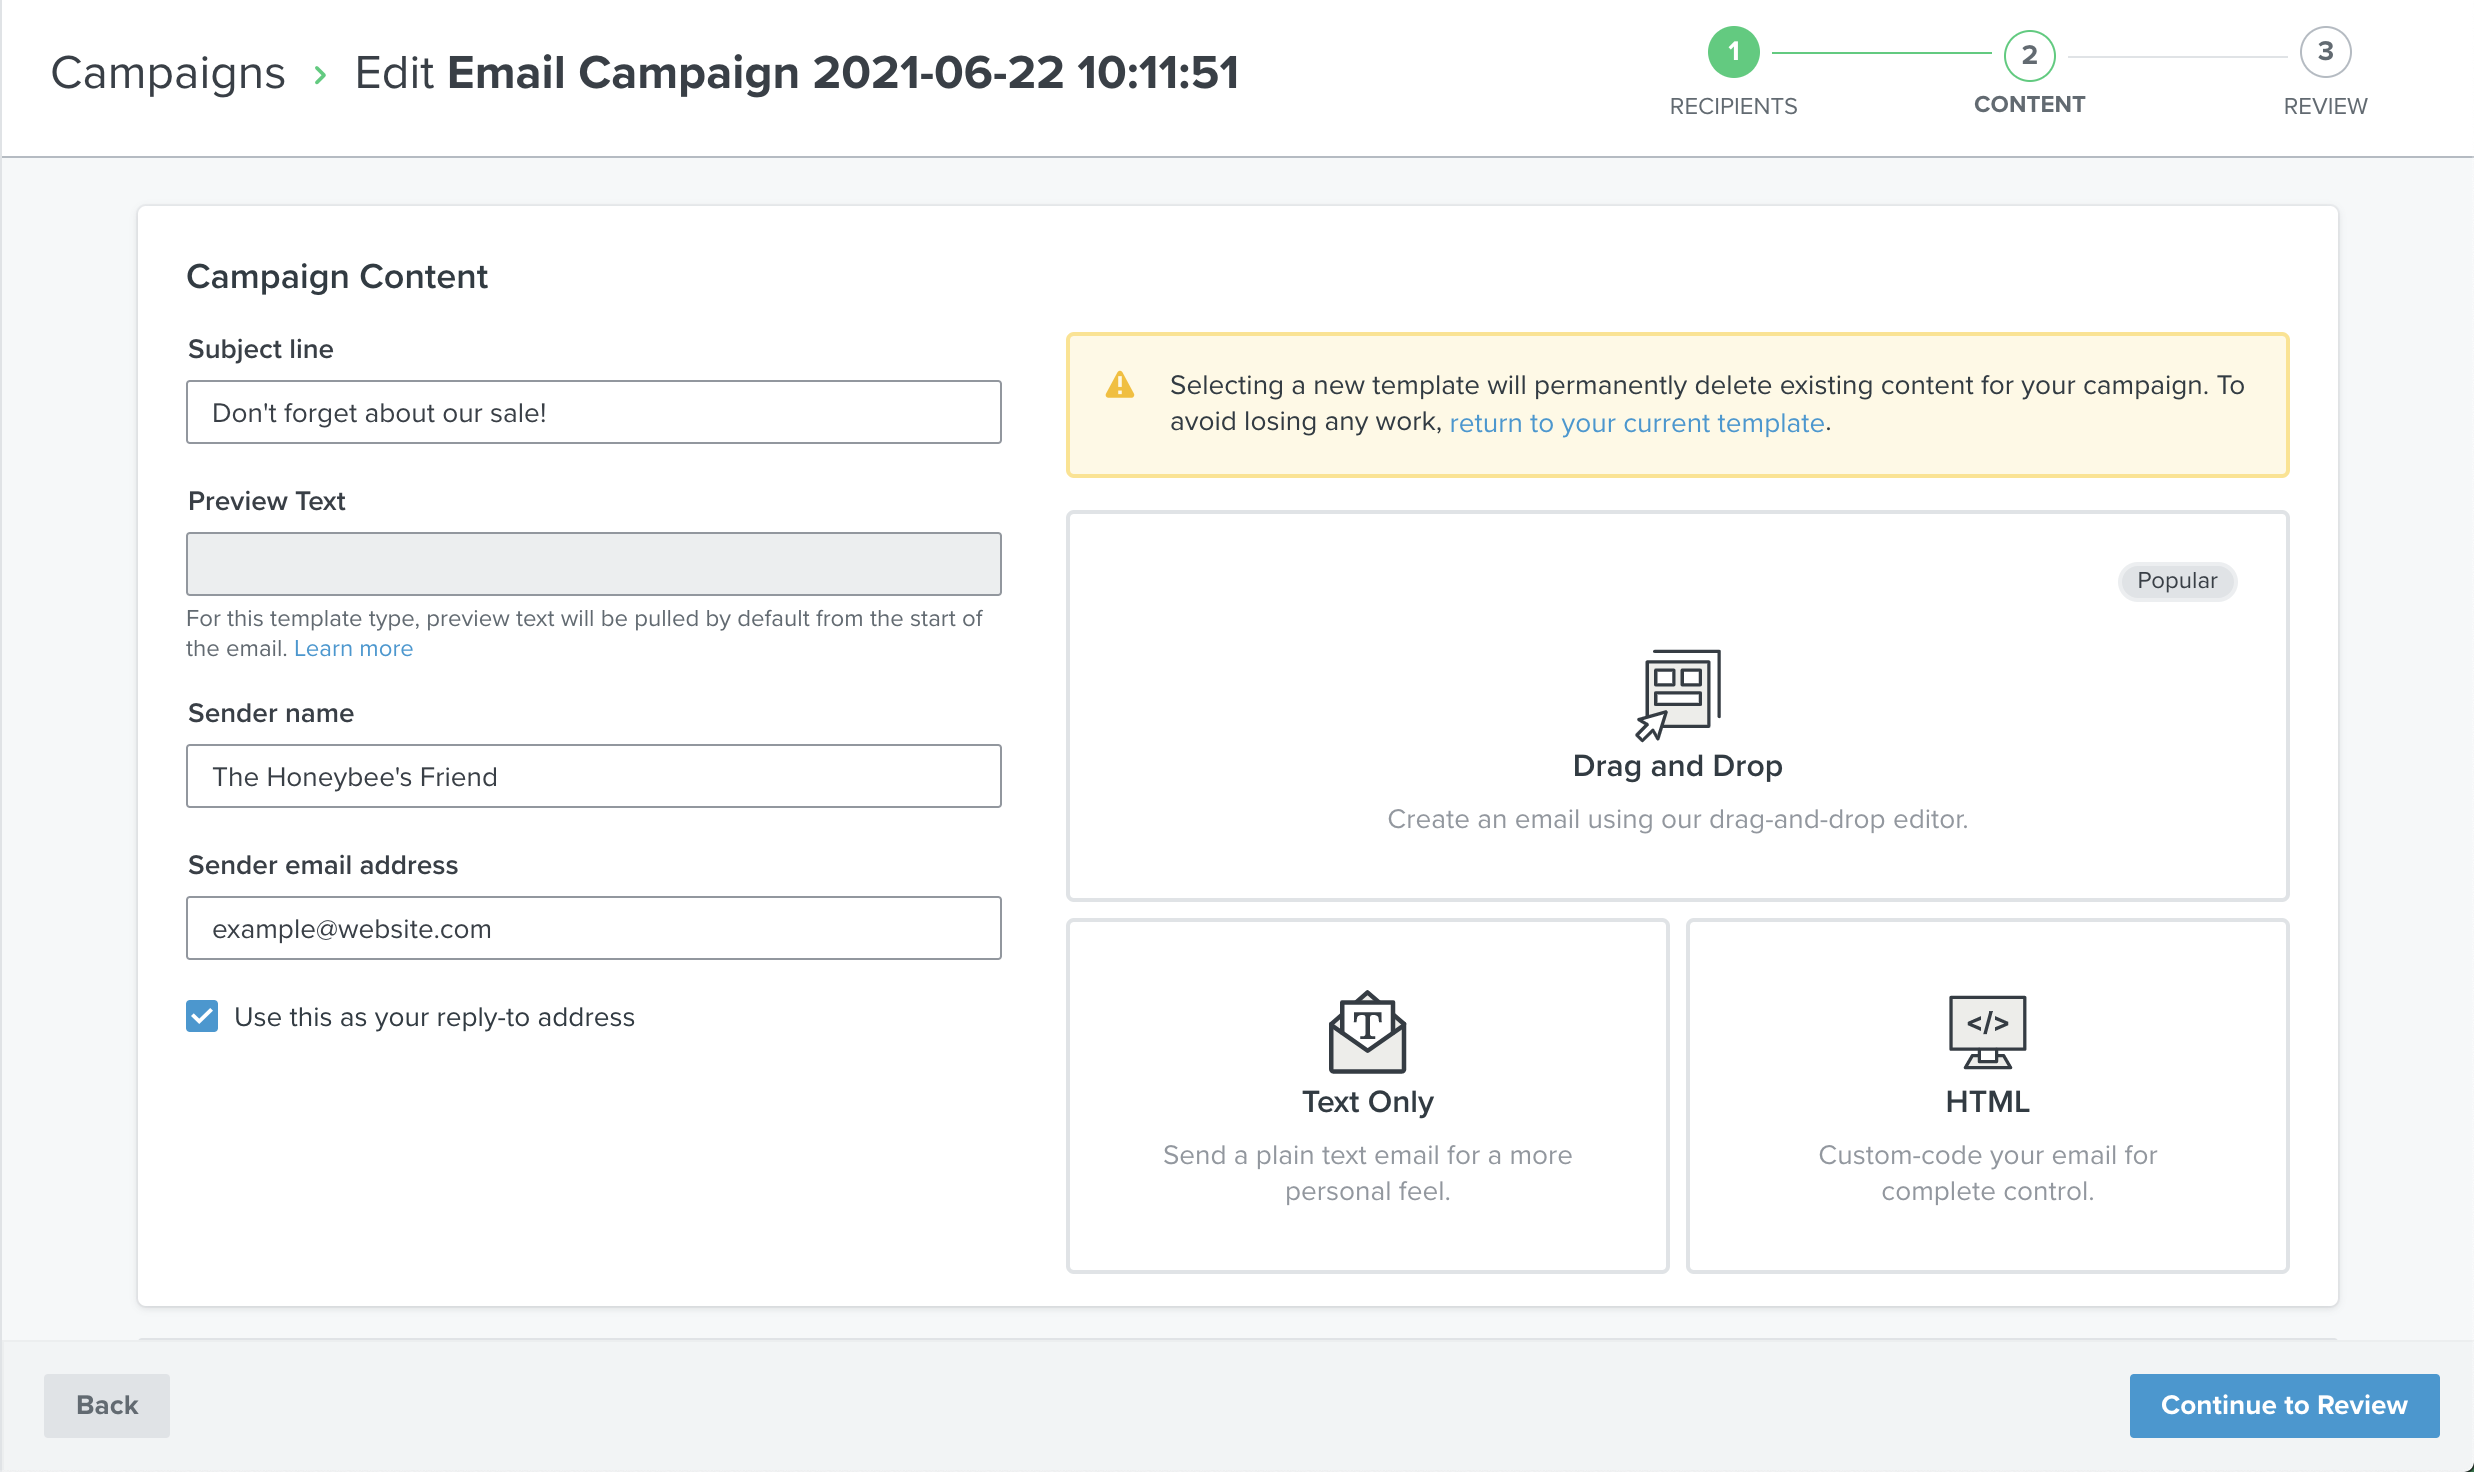 Screen where a new template can be selected for a campaign email